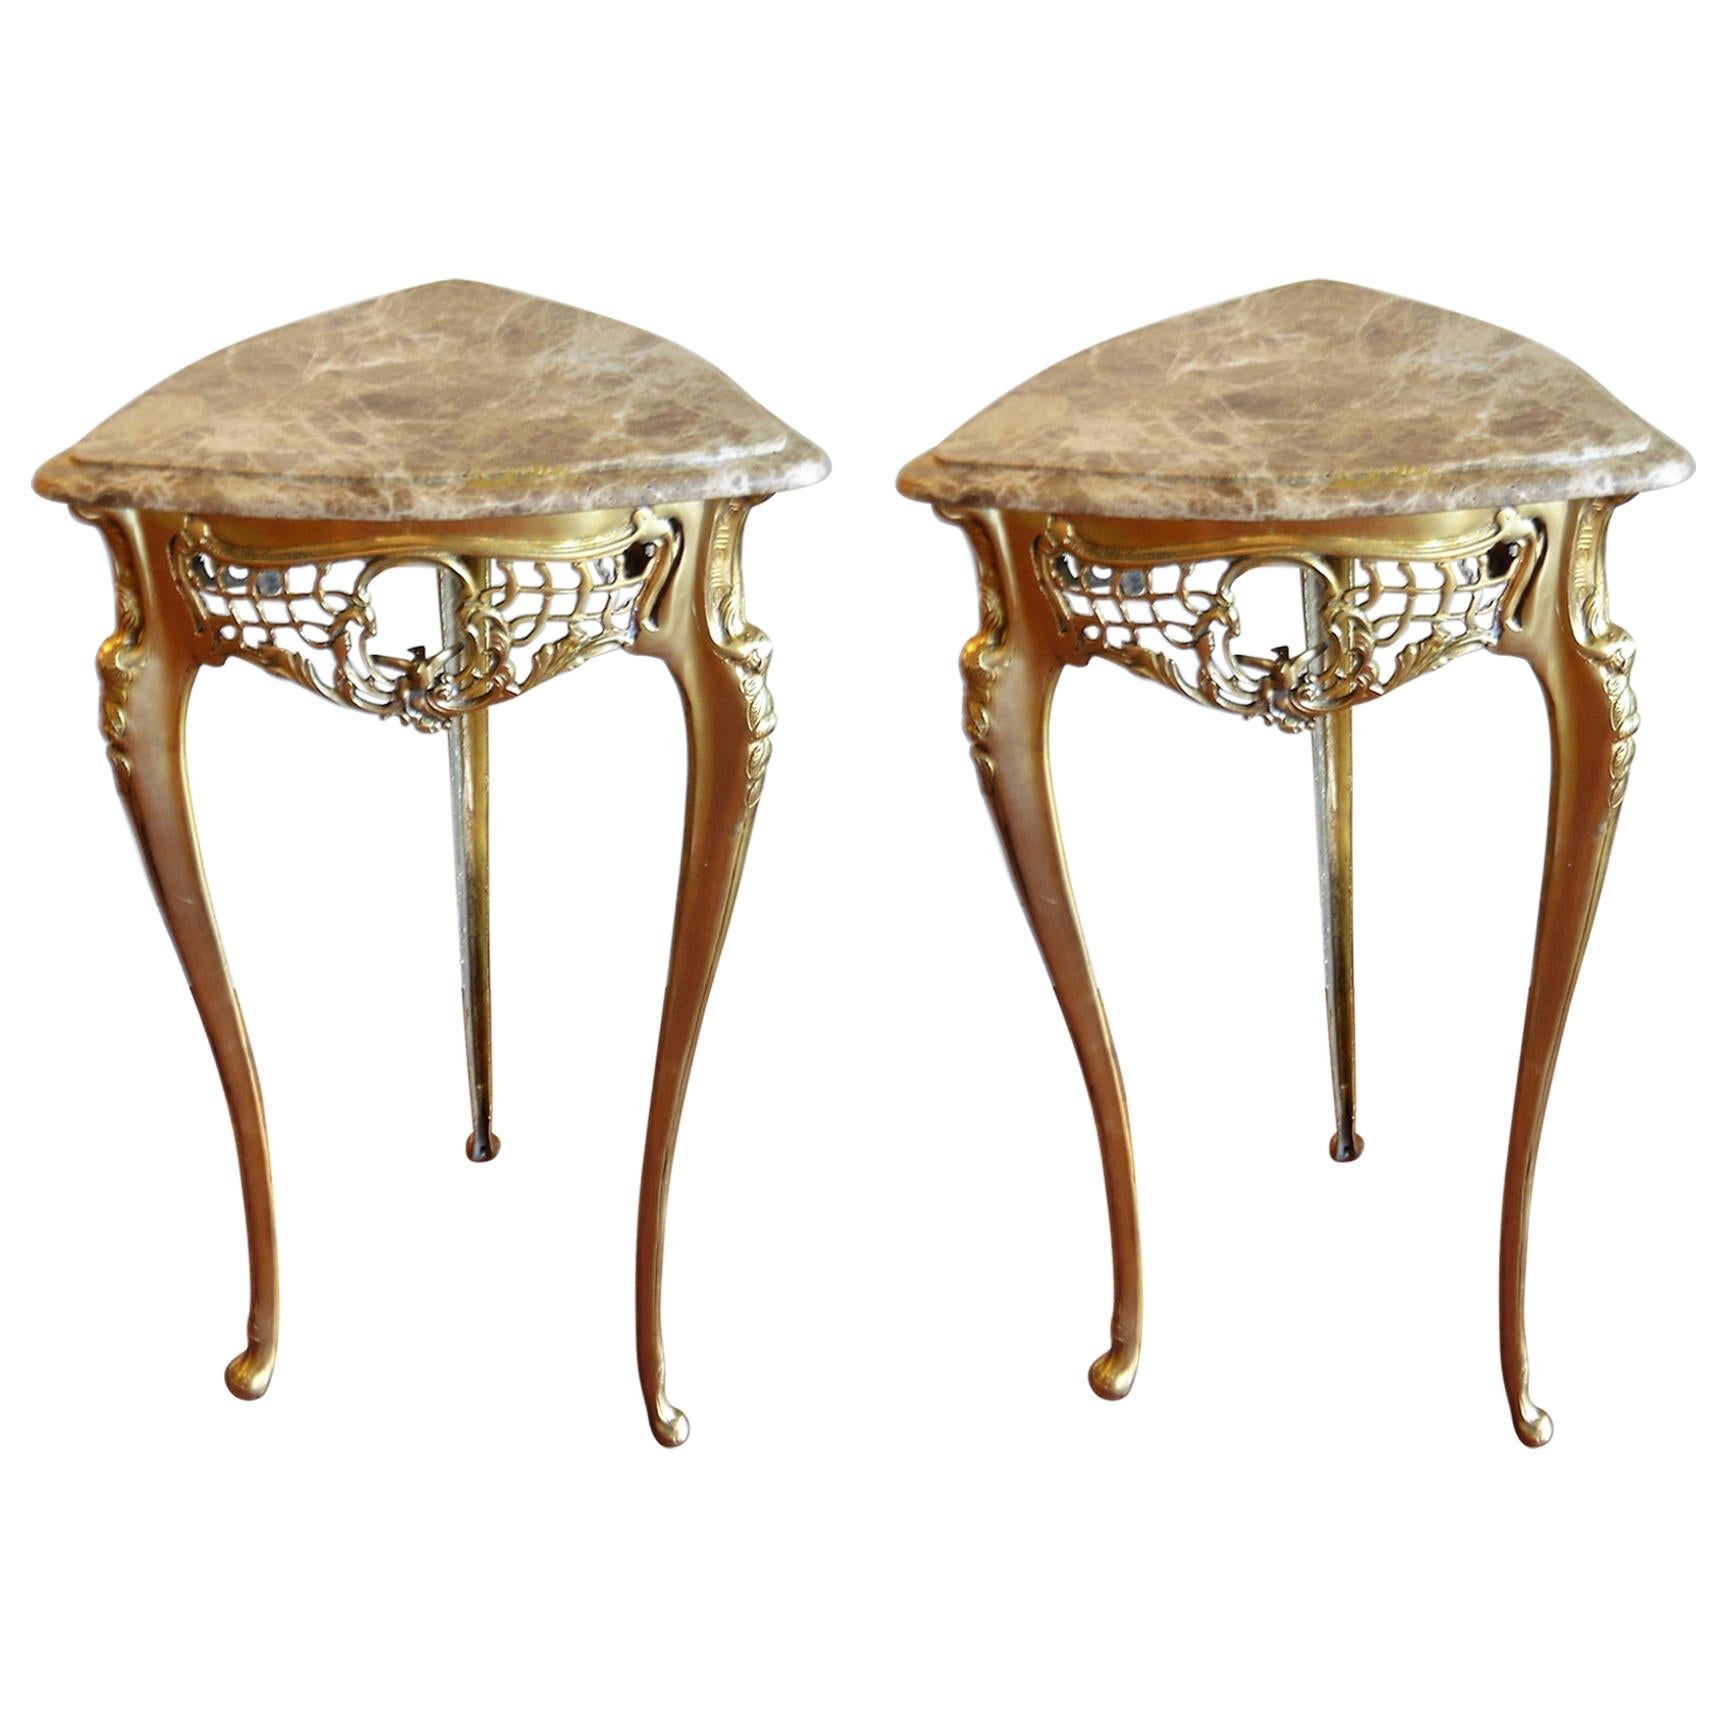 Pair of Small Side Tables, Bronze Base, Highly Decorative, Lace, Birds, Marble